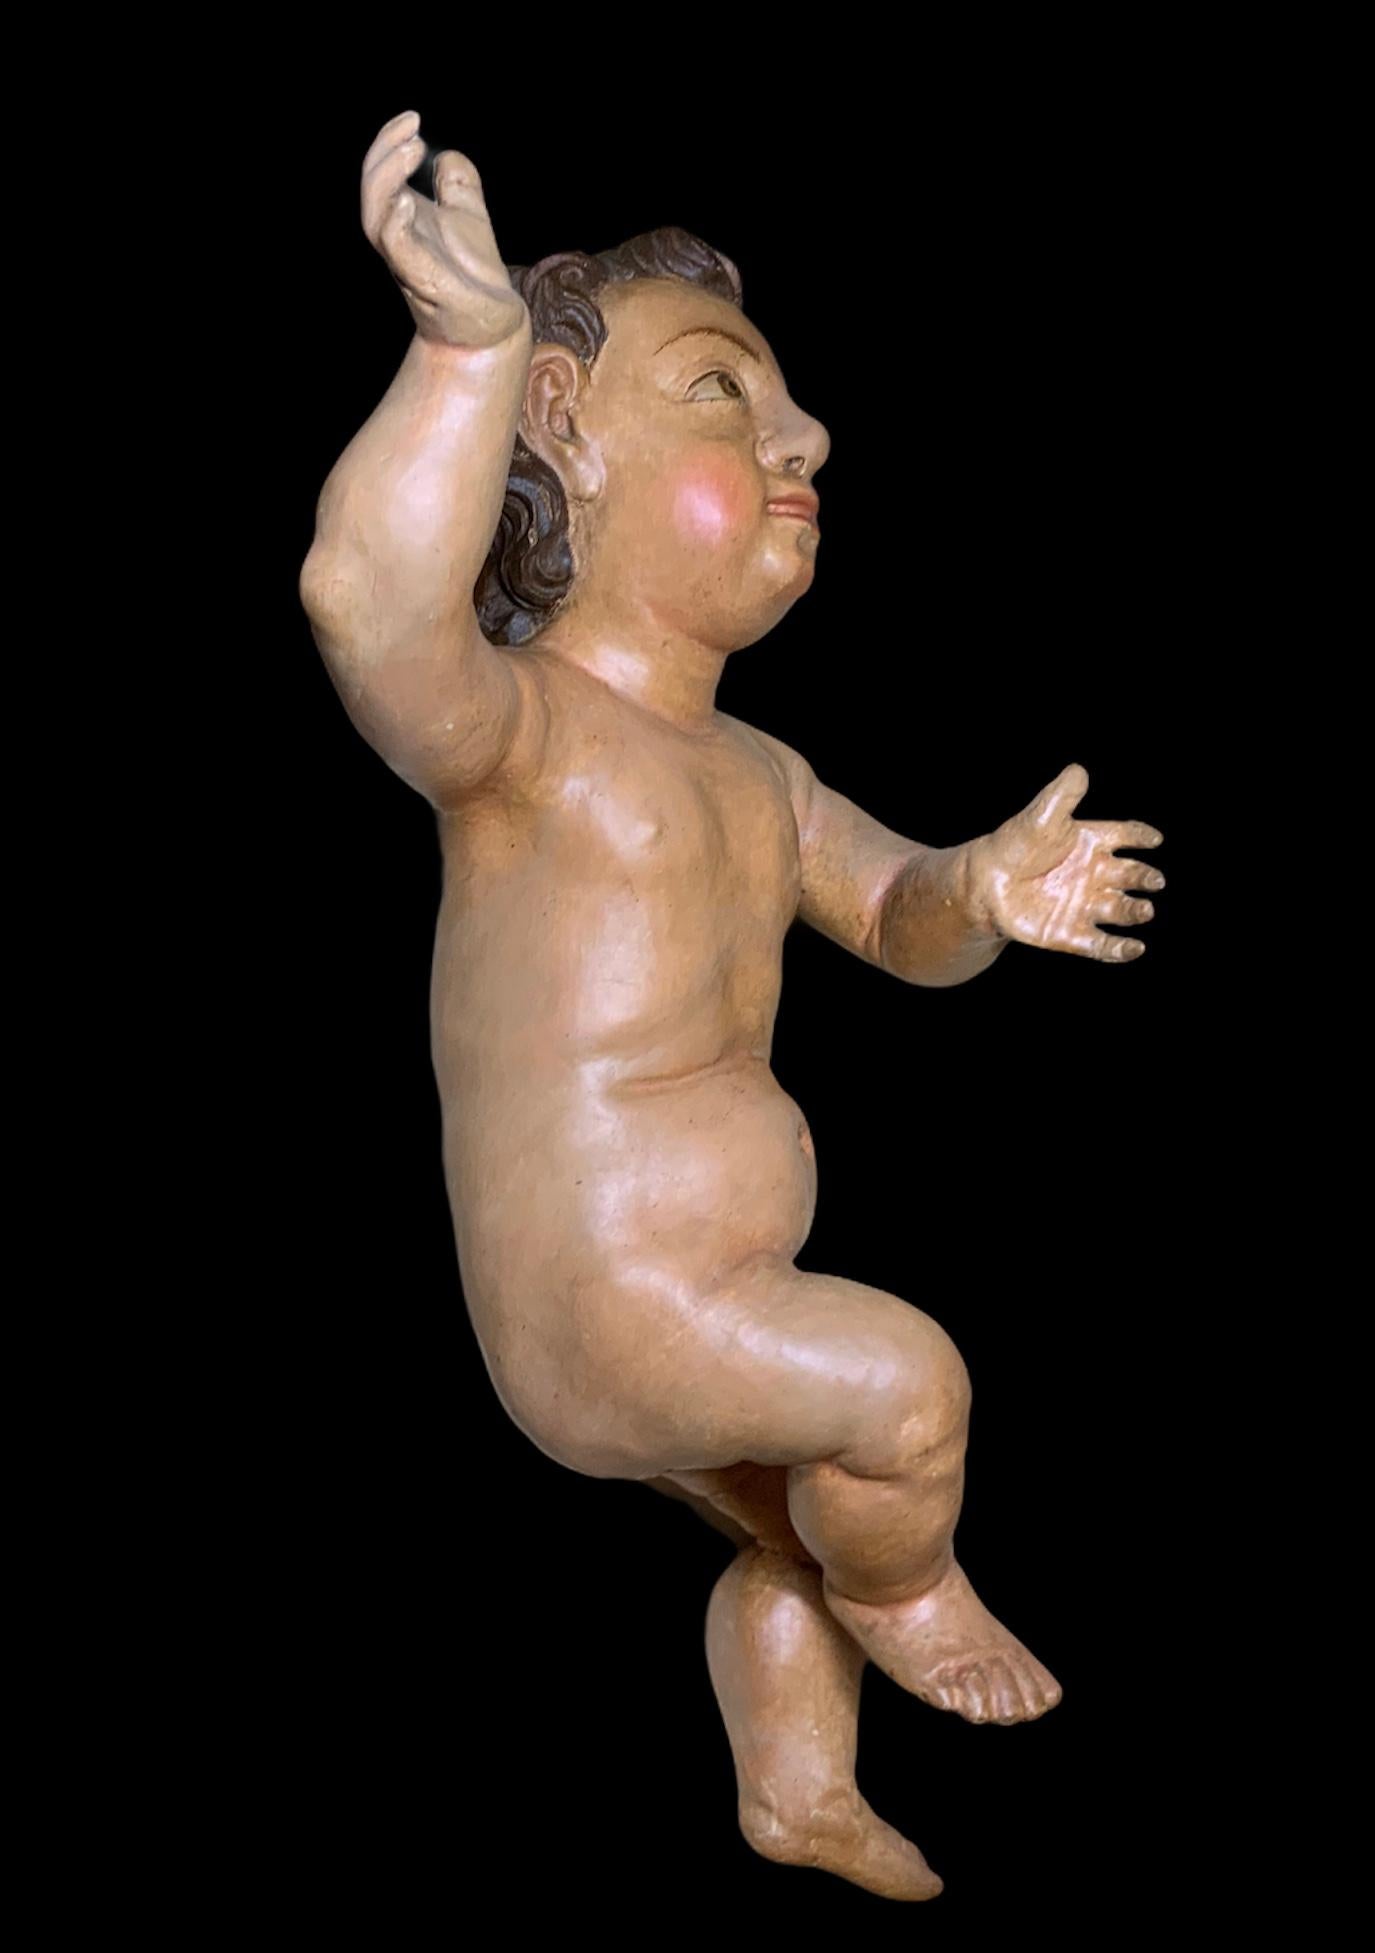 This is an old large Spaniard hand painted and carved wood nude baby Jesus. He has hand painted large expressive eyes and eye brows. His abundant hair is brown and curly. His right hand is raised in blessing position and the left one is like